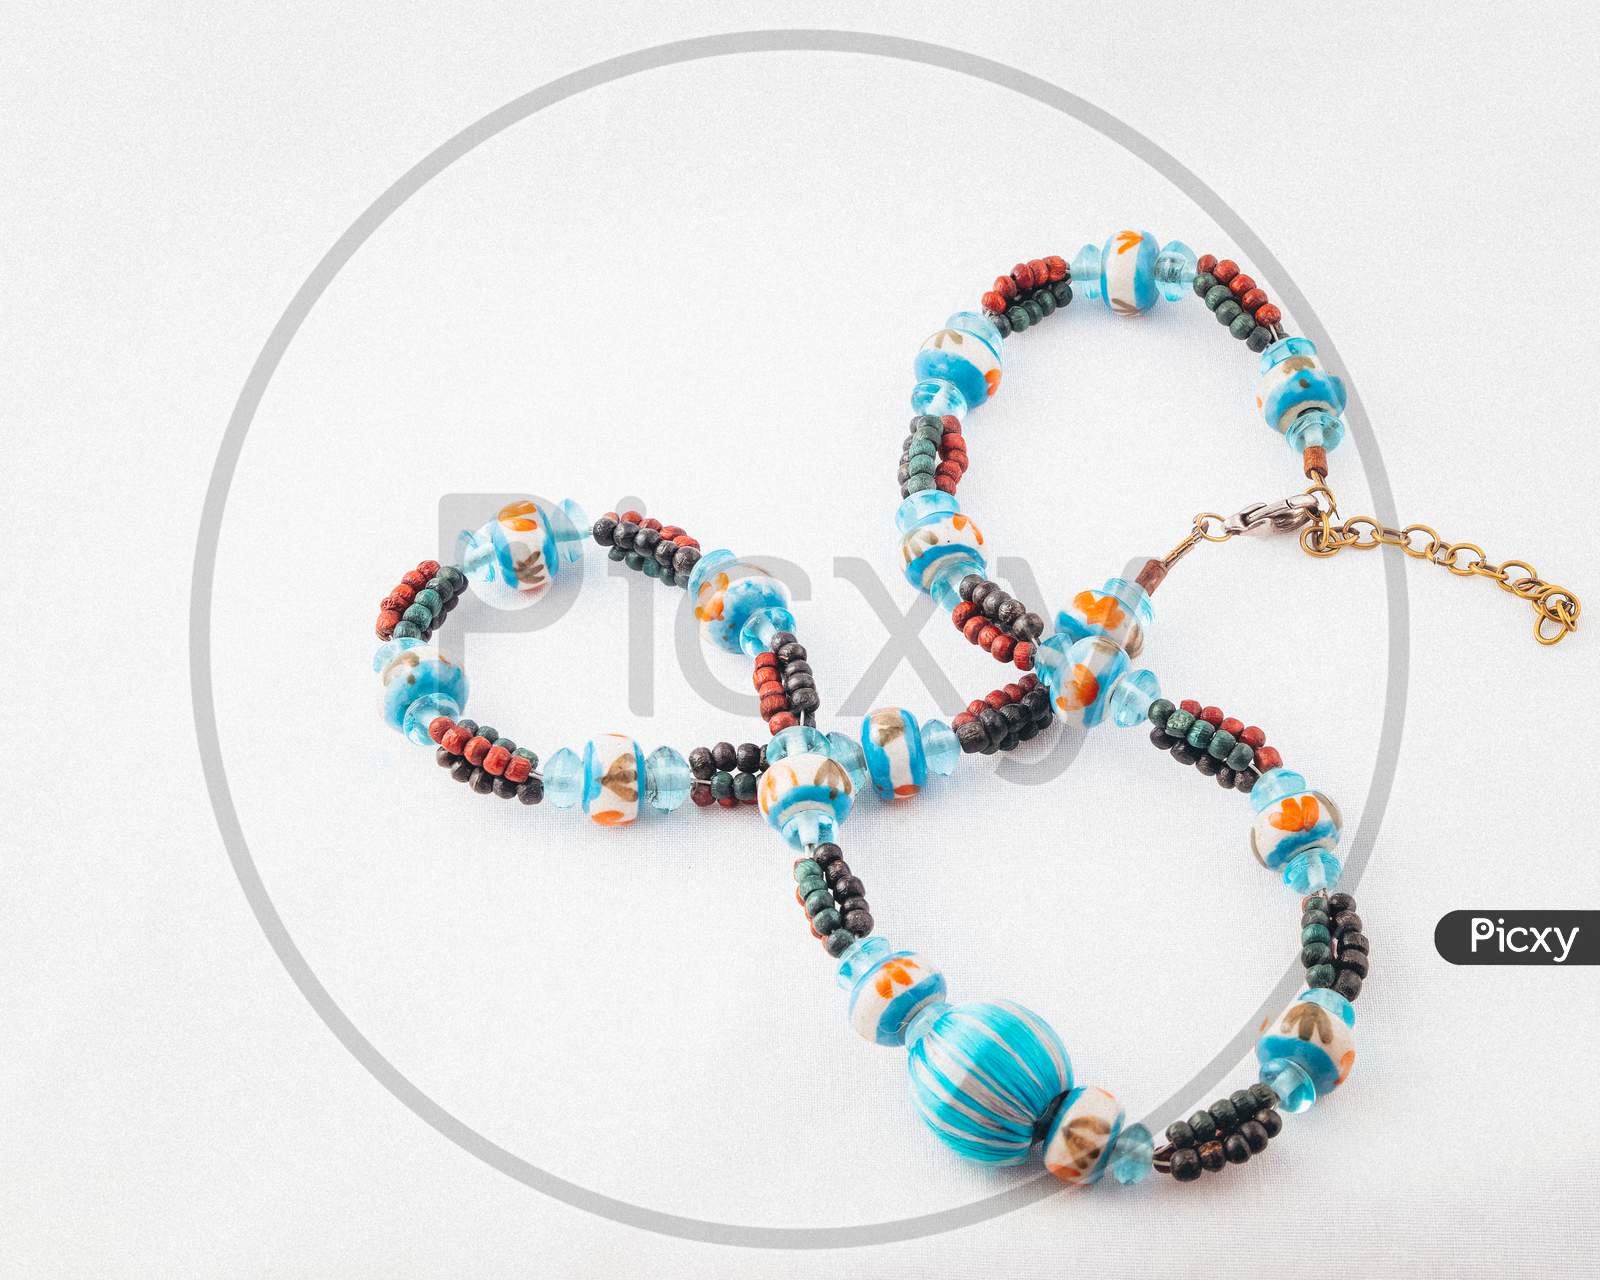 Strand of chunky coloured beads laid on white background